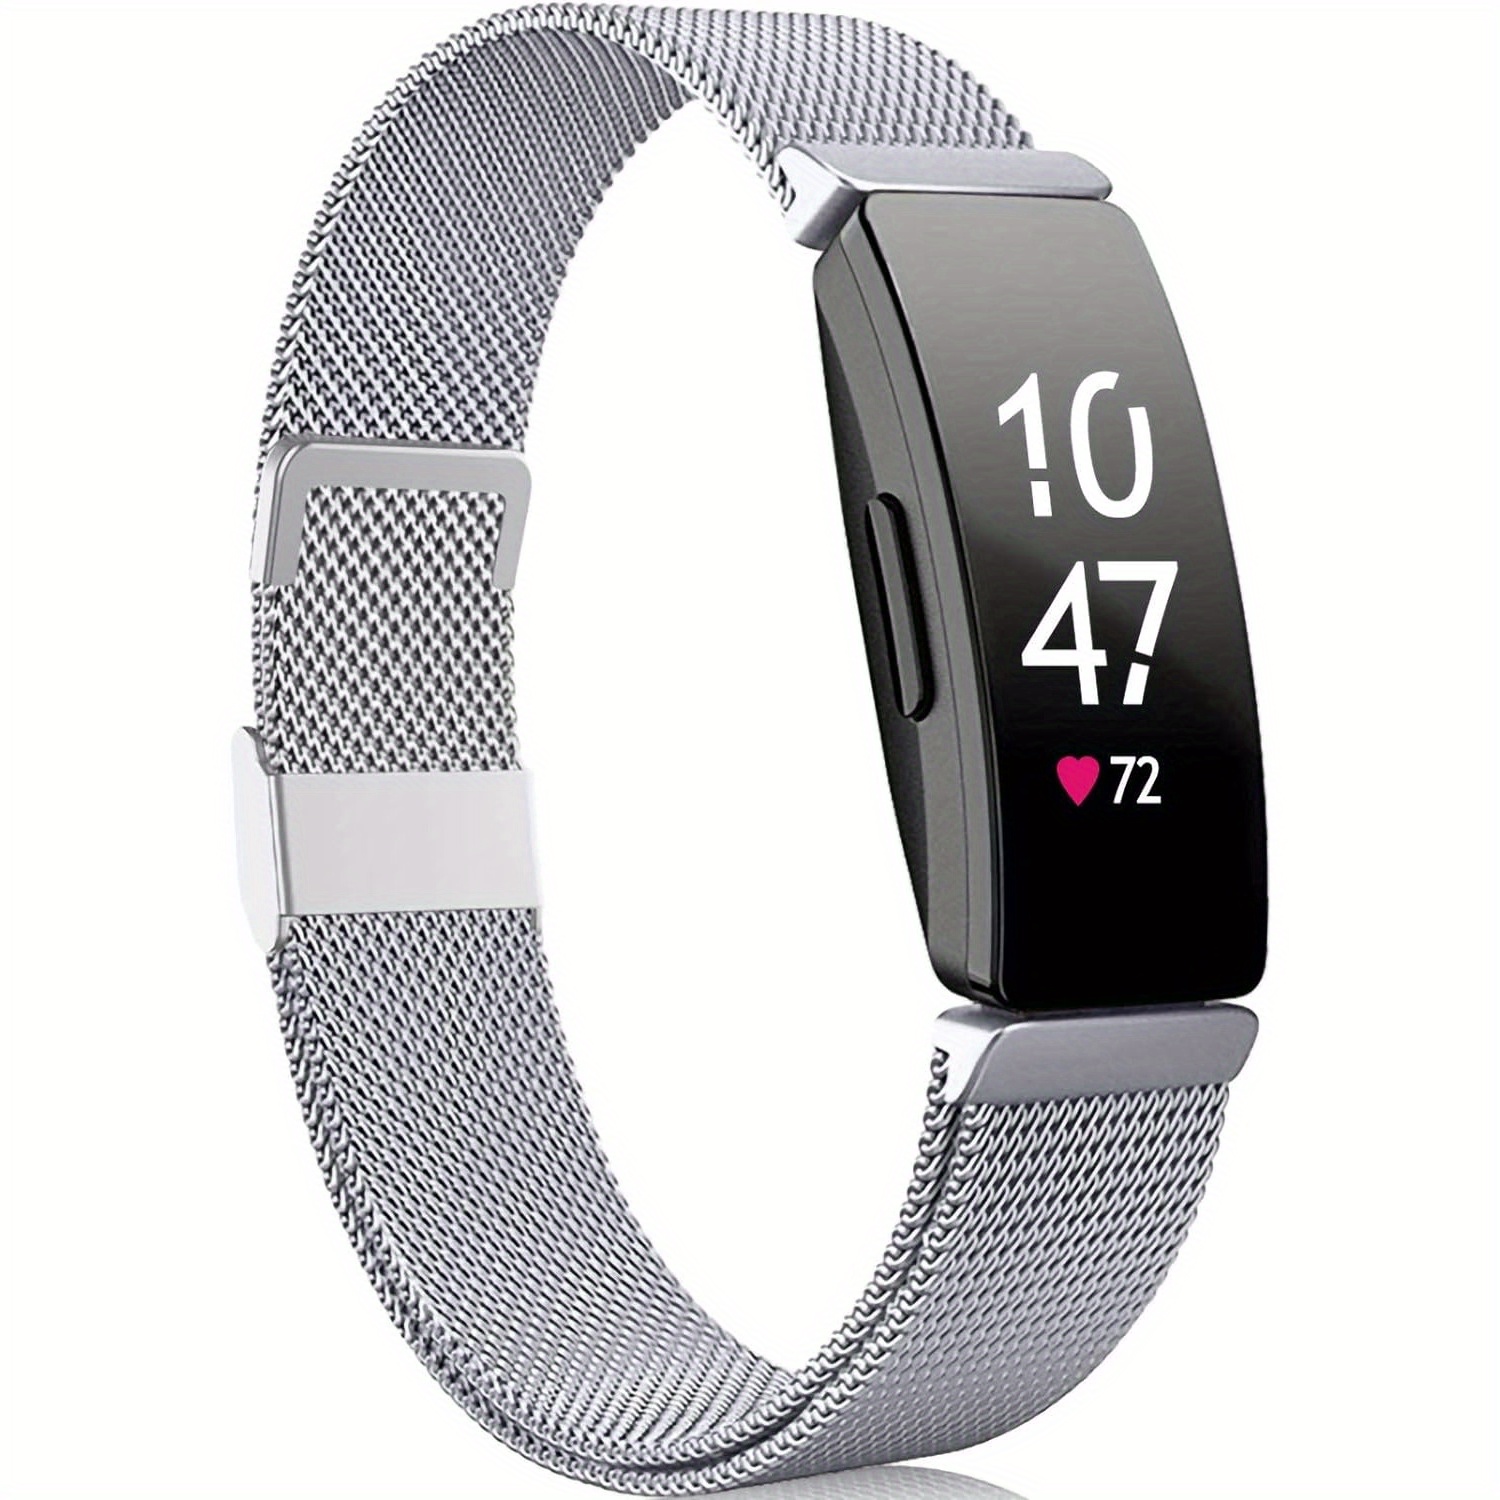 Stainless Steel Mesh Breathable Wristband Strap for Women's Fitbit